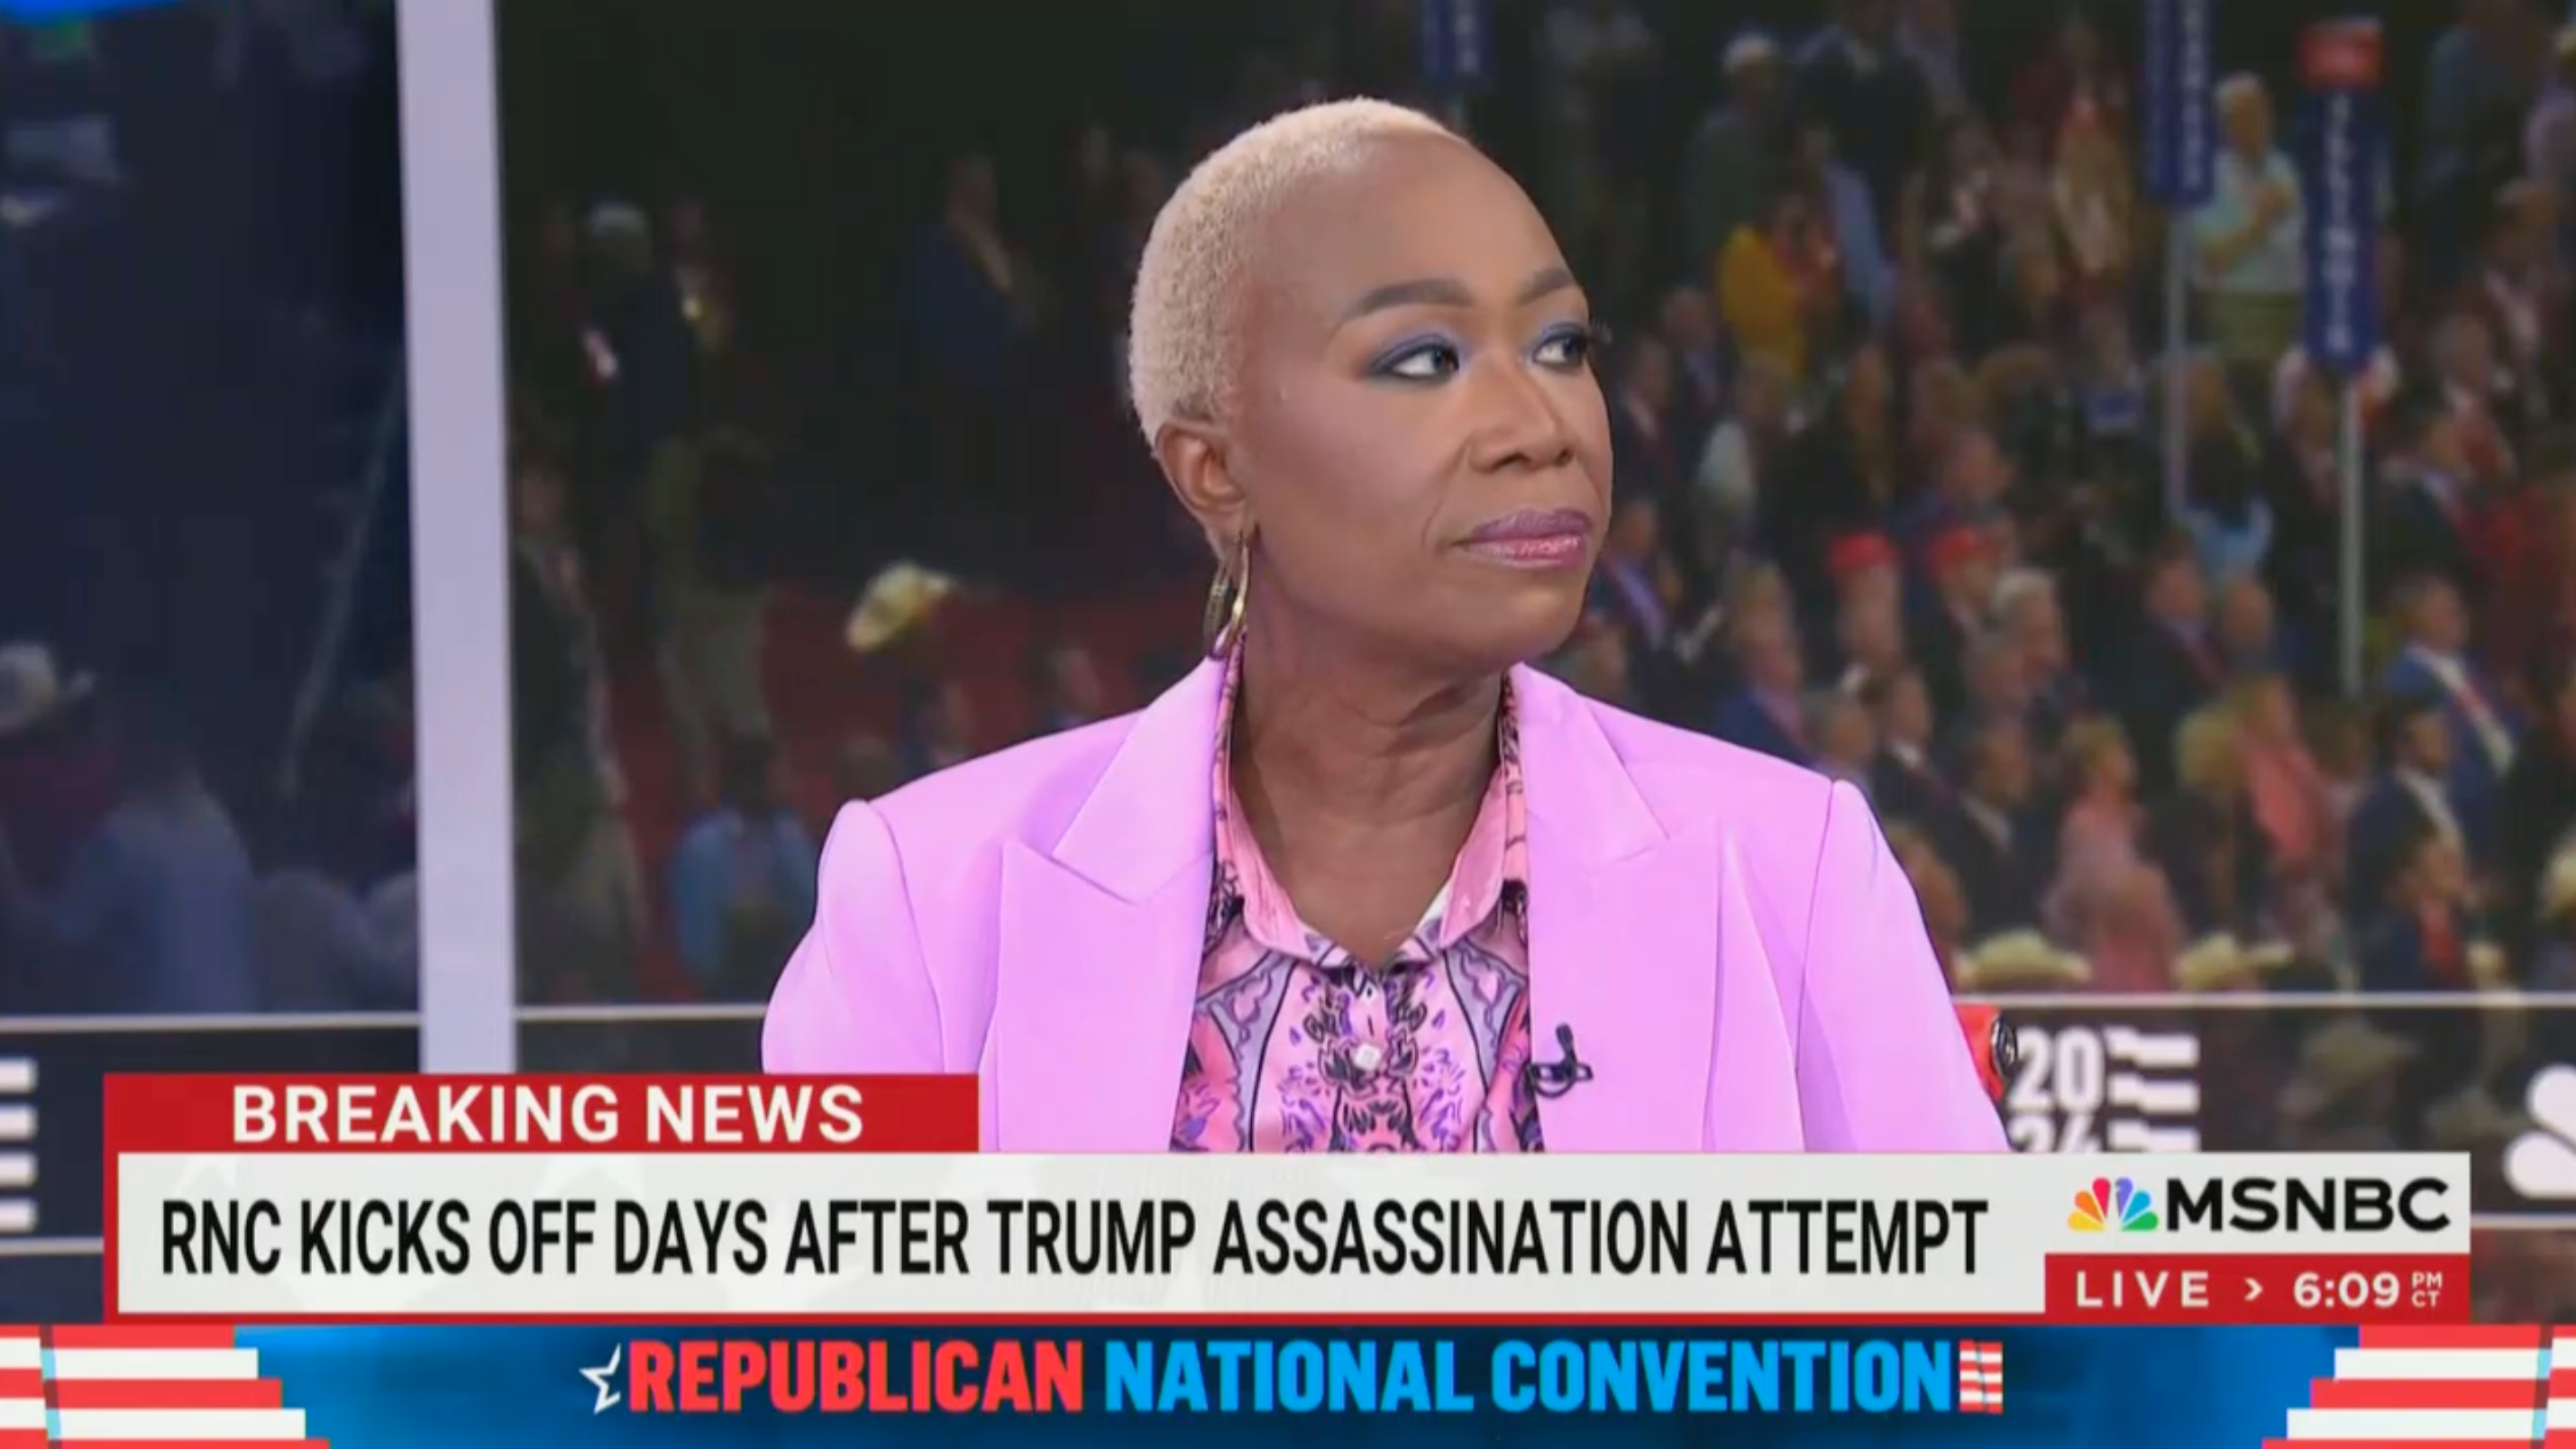 MSNBC’s Joy Reid Is Just Asking Questions About the Attempt on Donald Trump’s Life